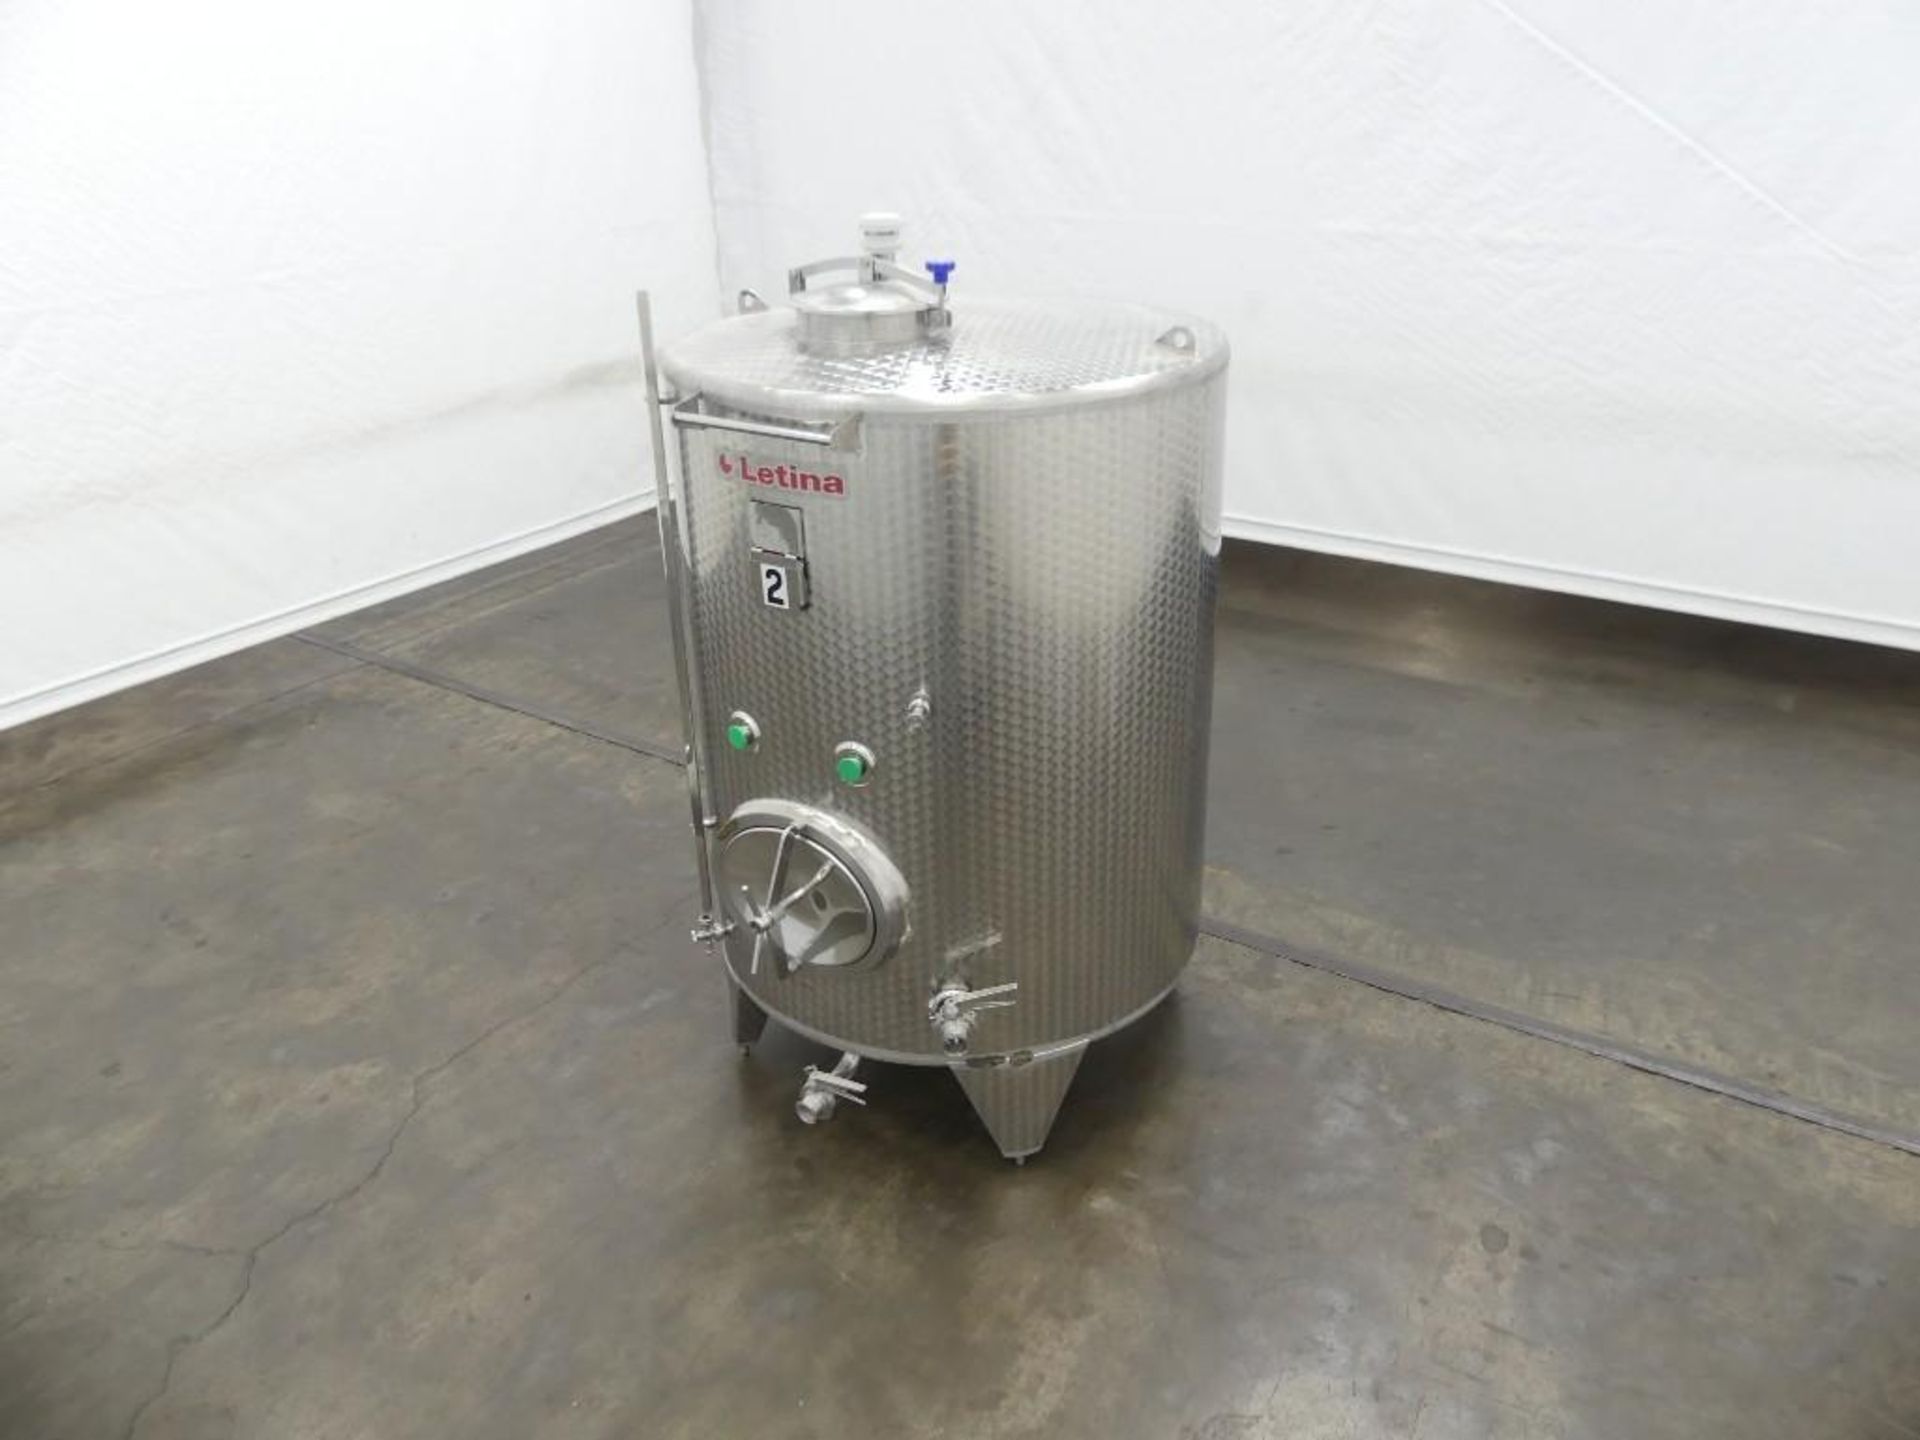 Letina 525 Gallon Stainless Steel Dimple Jacketed Tank - Image 2 of 23